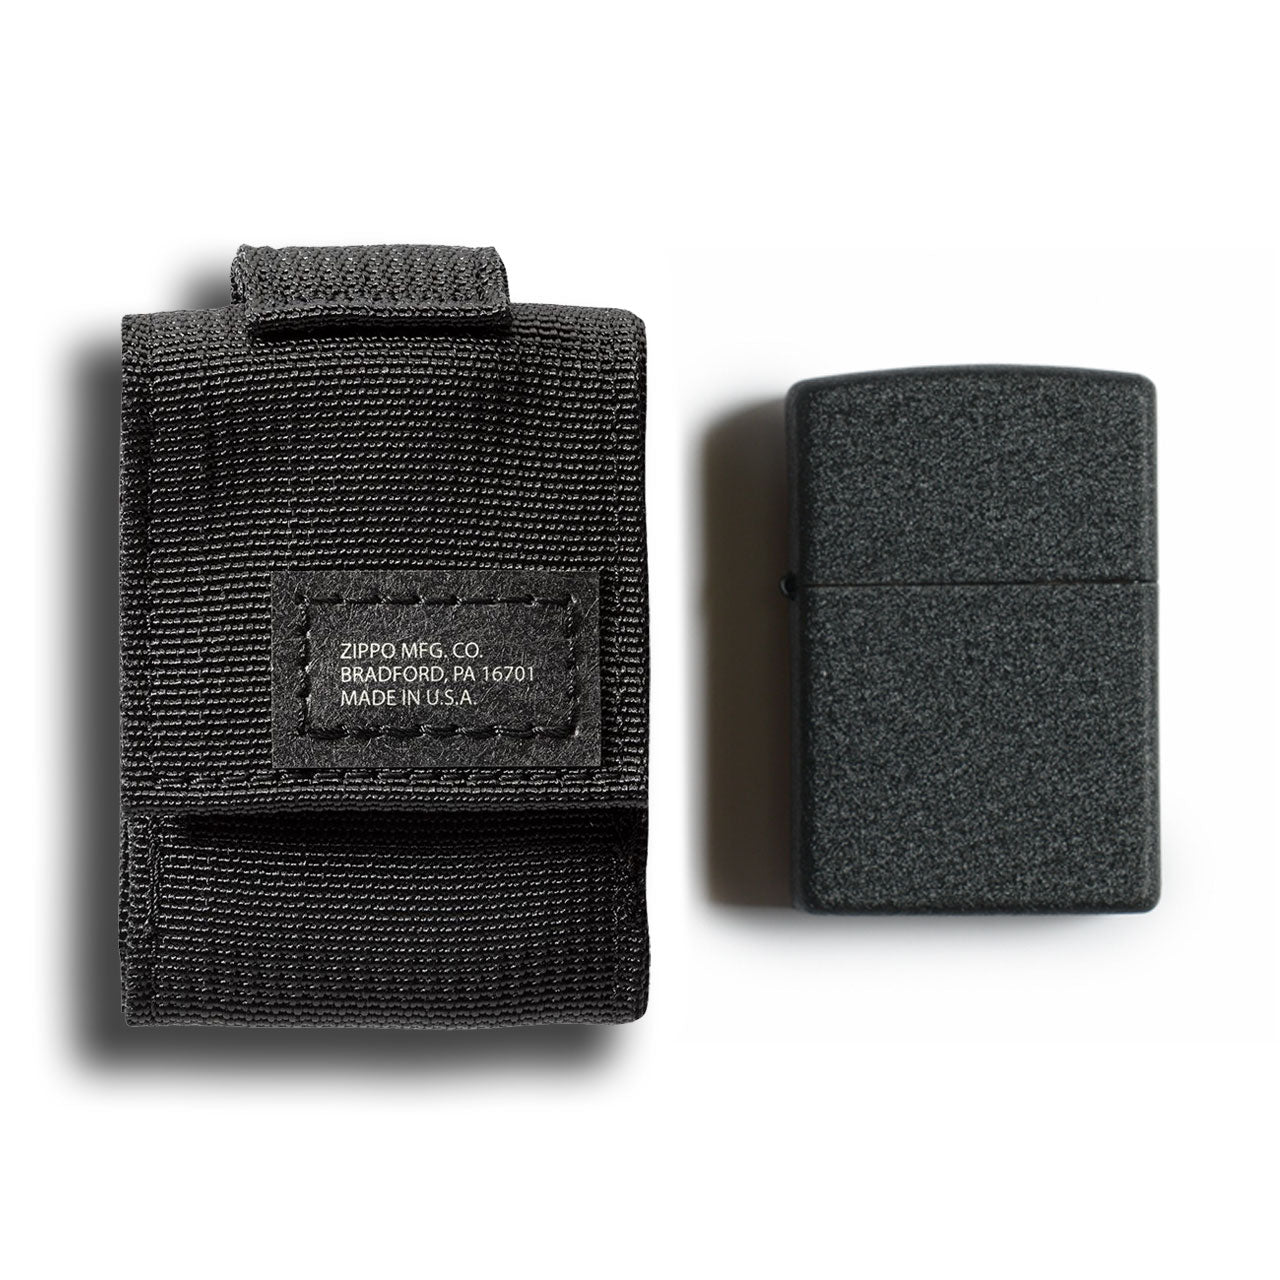 ETUI ZIPPO POUCH BLACK WITH LOOP 60.001221